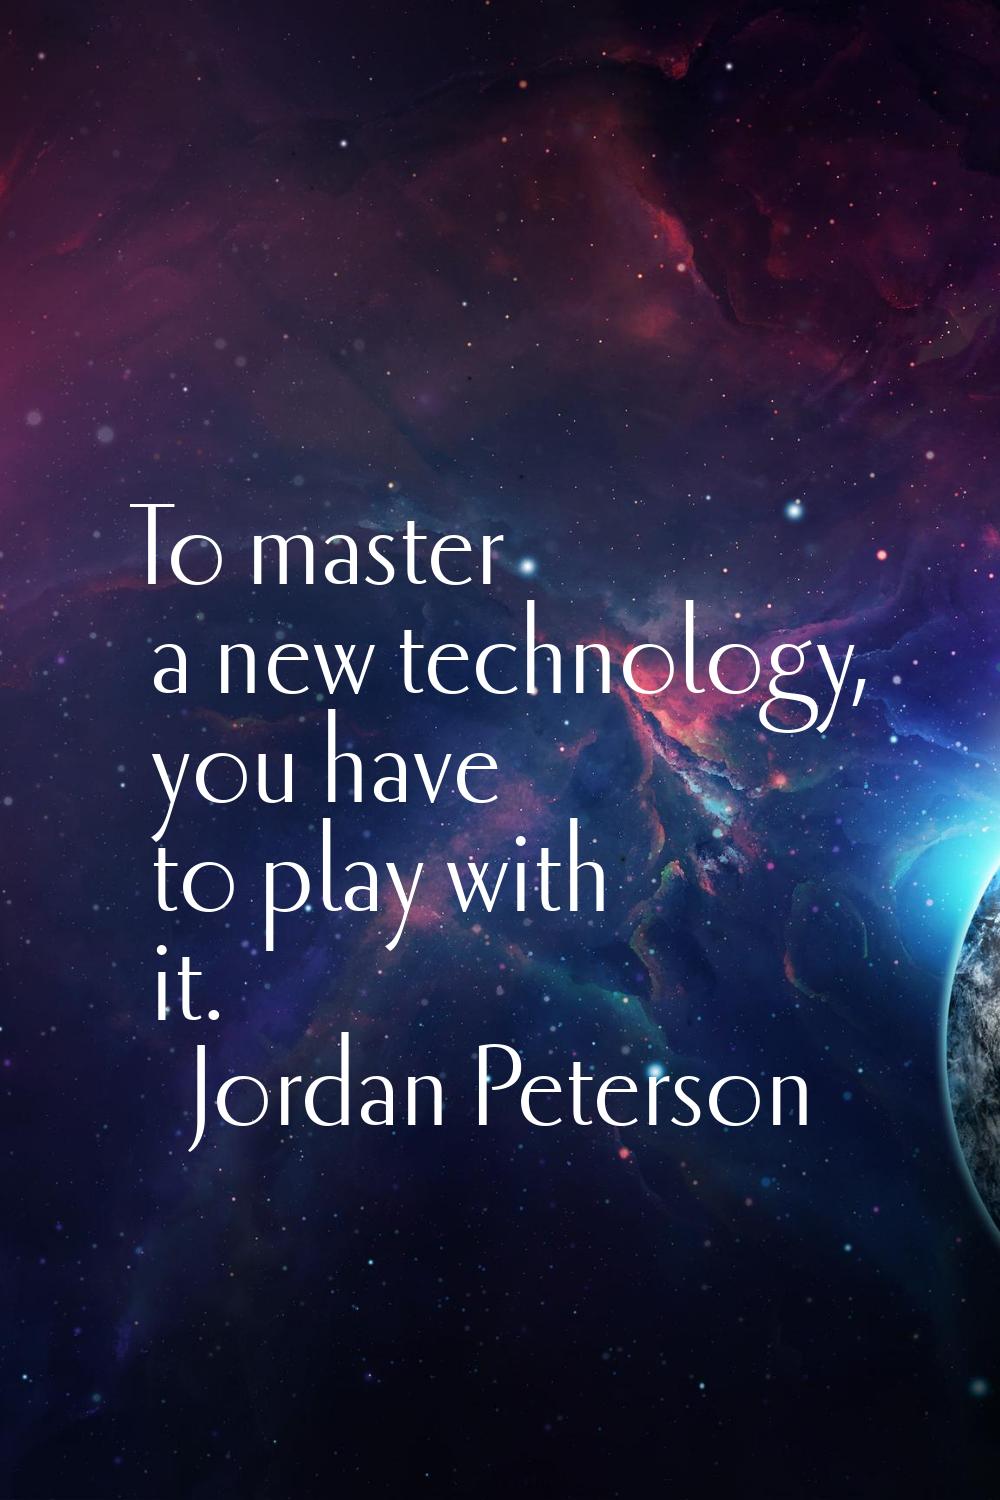 To master a new technology, you have to play with it.